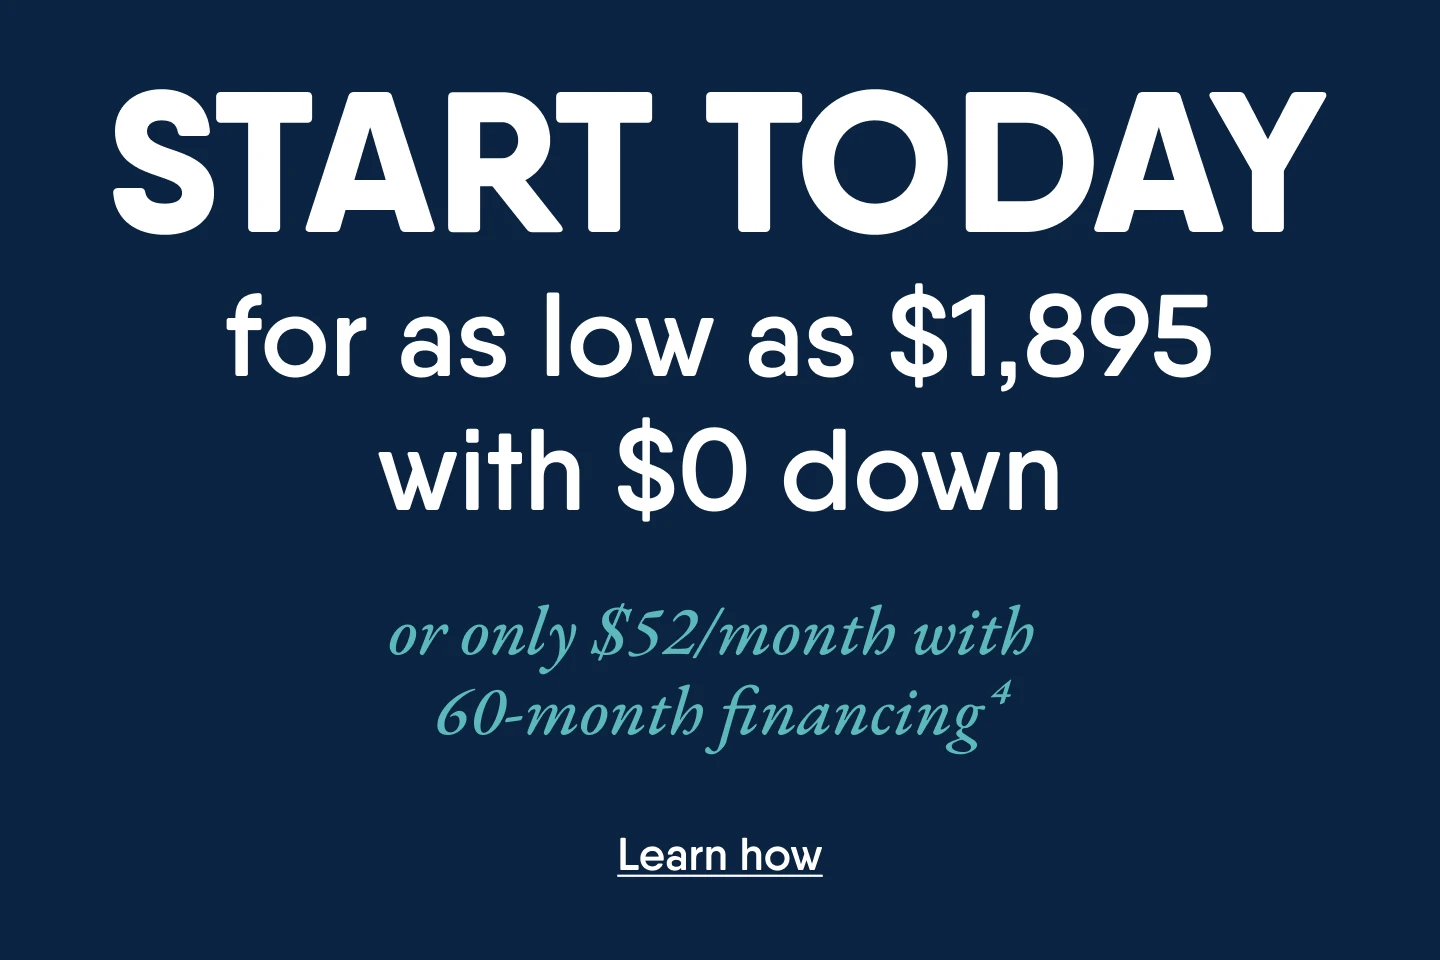 Start today for as low as $1895 with $0 down. Or only $52 per month with 60 month financing. 